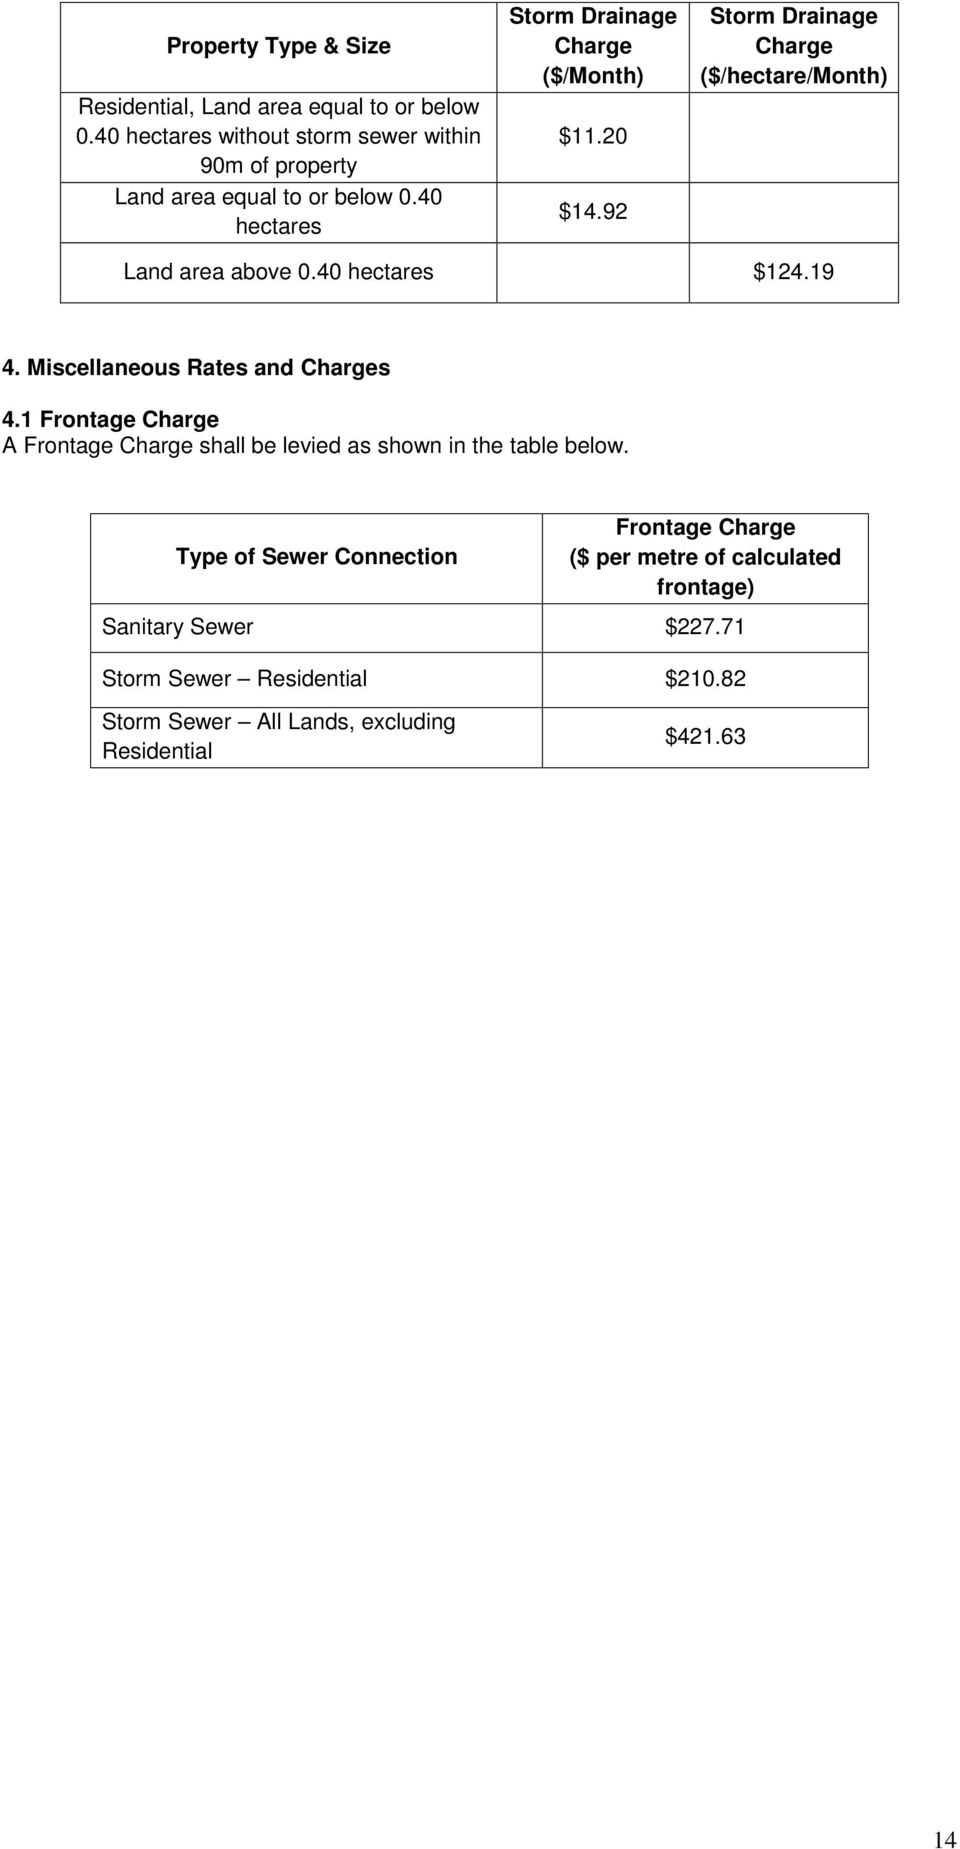 92 Storm Drainage Charge ($/hectare/month) Land area above 0.40 hectares $124.19 4. Miscellaneous Rates and Charges 4.